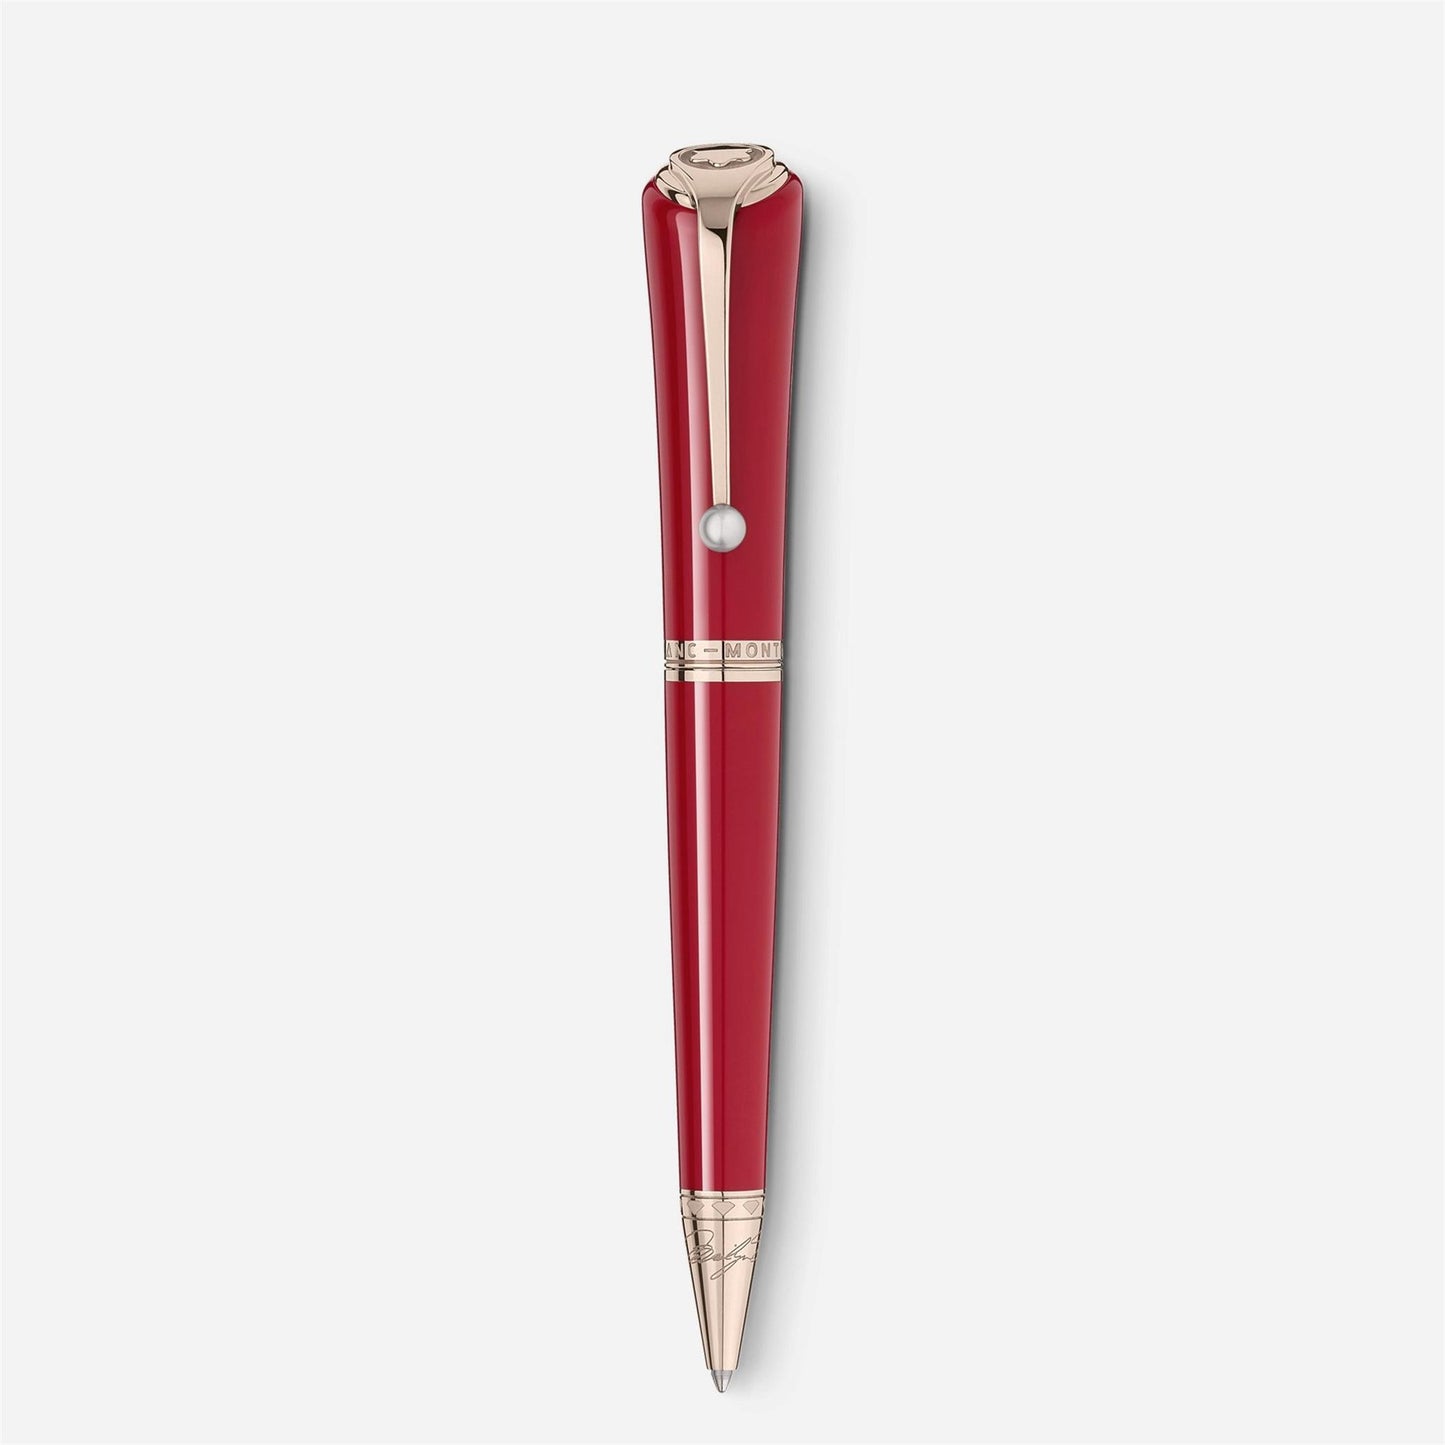 Montlblanch Muses Marilyn Monroe Special Edition Ballpoint Pen